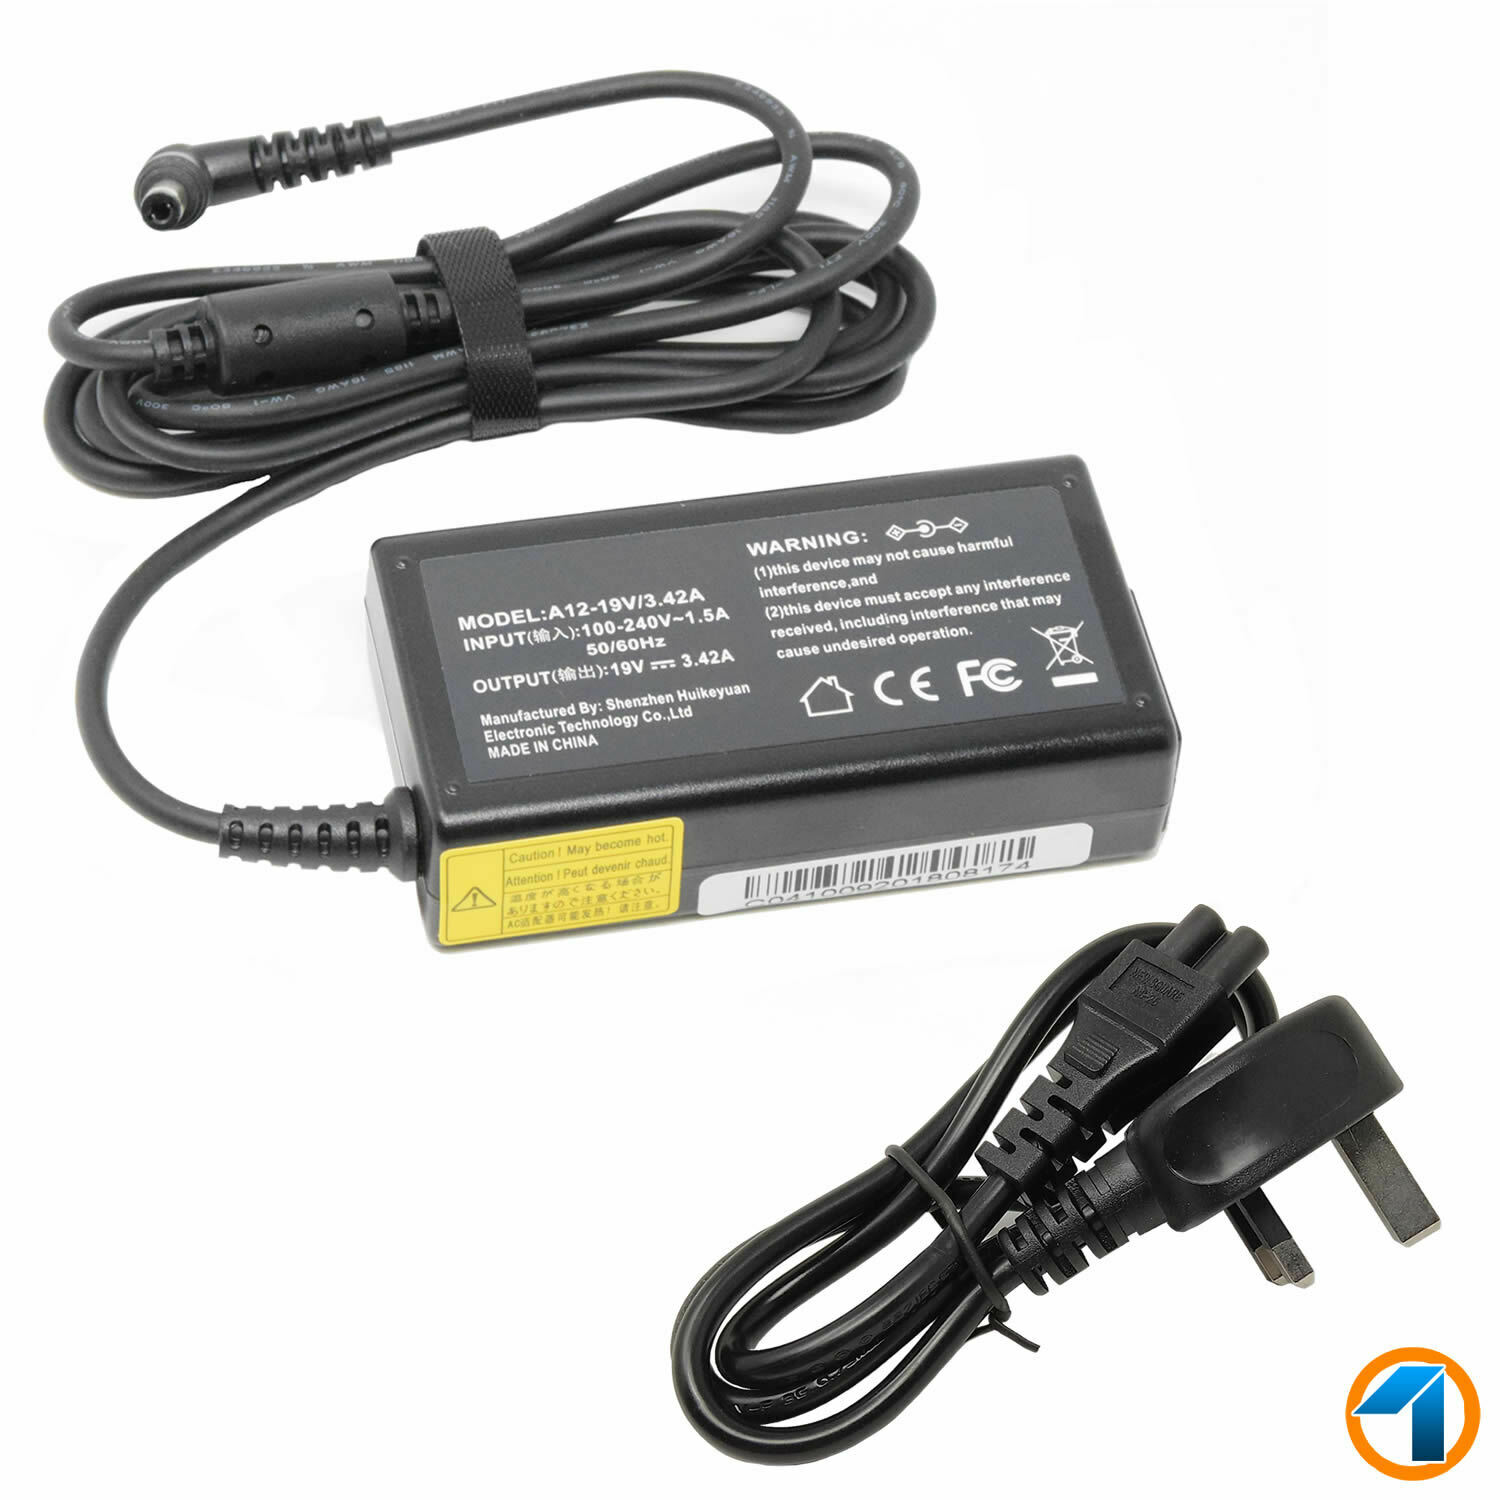 New 19V 3.42A CHARGER ADAPTER FOR ADVENT MONZA T100 T200 G74 + 3 PIN UK POWER CABL